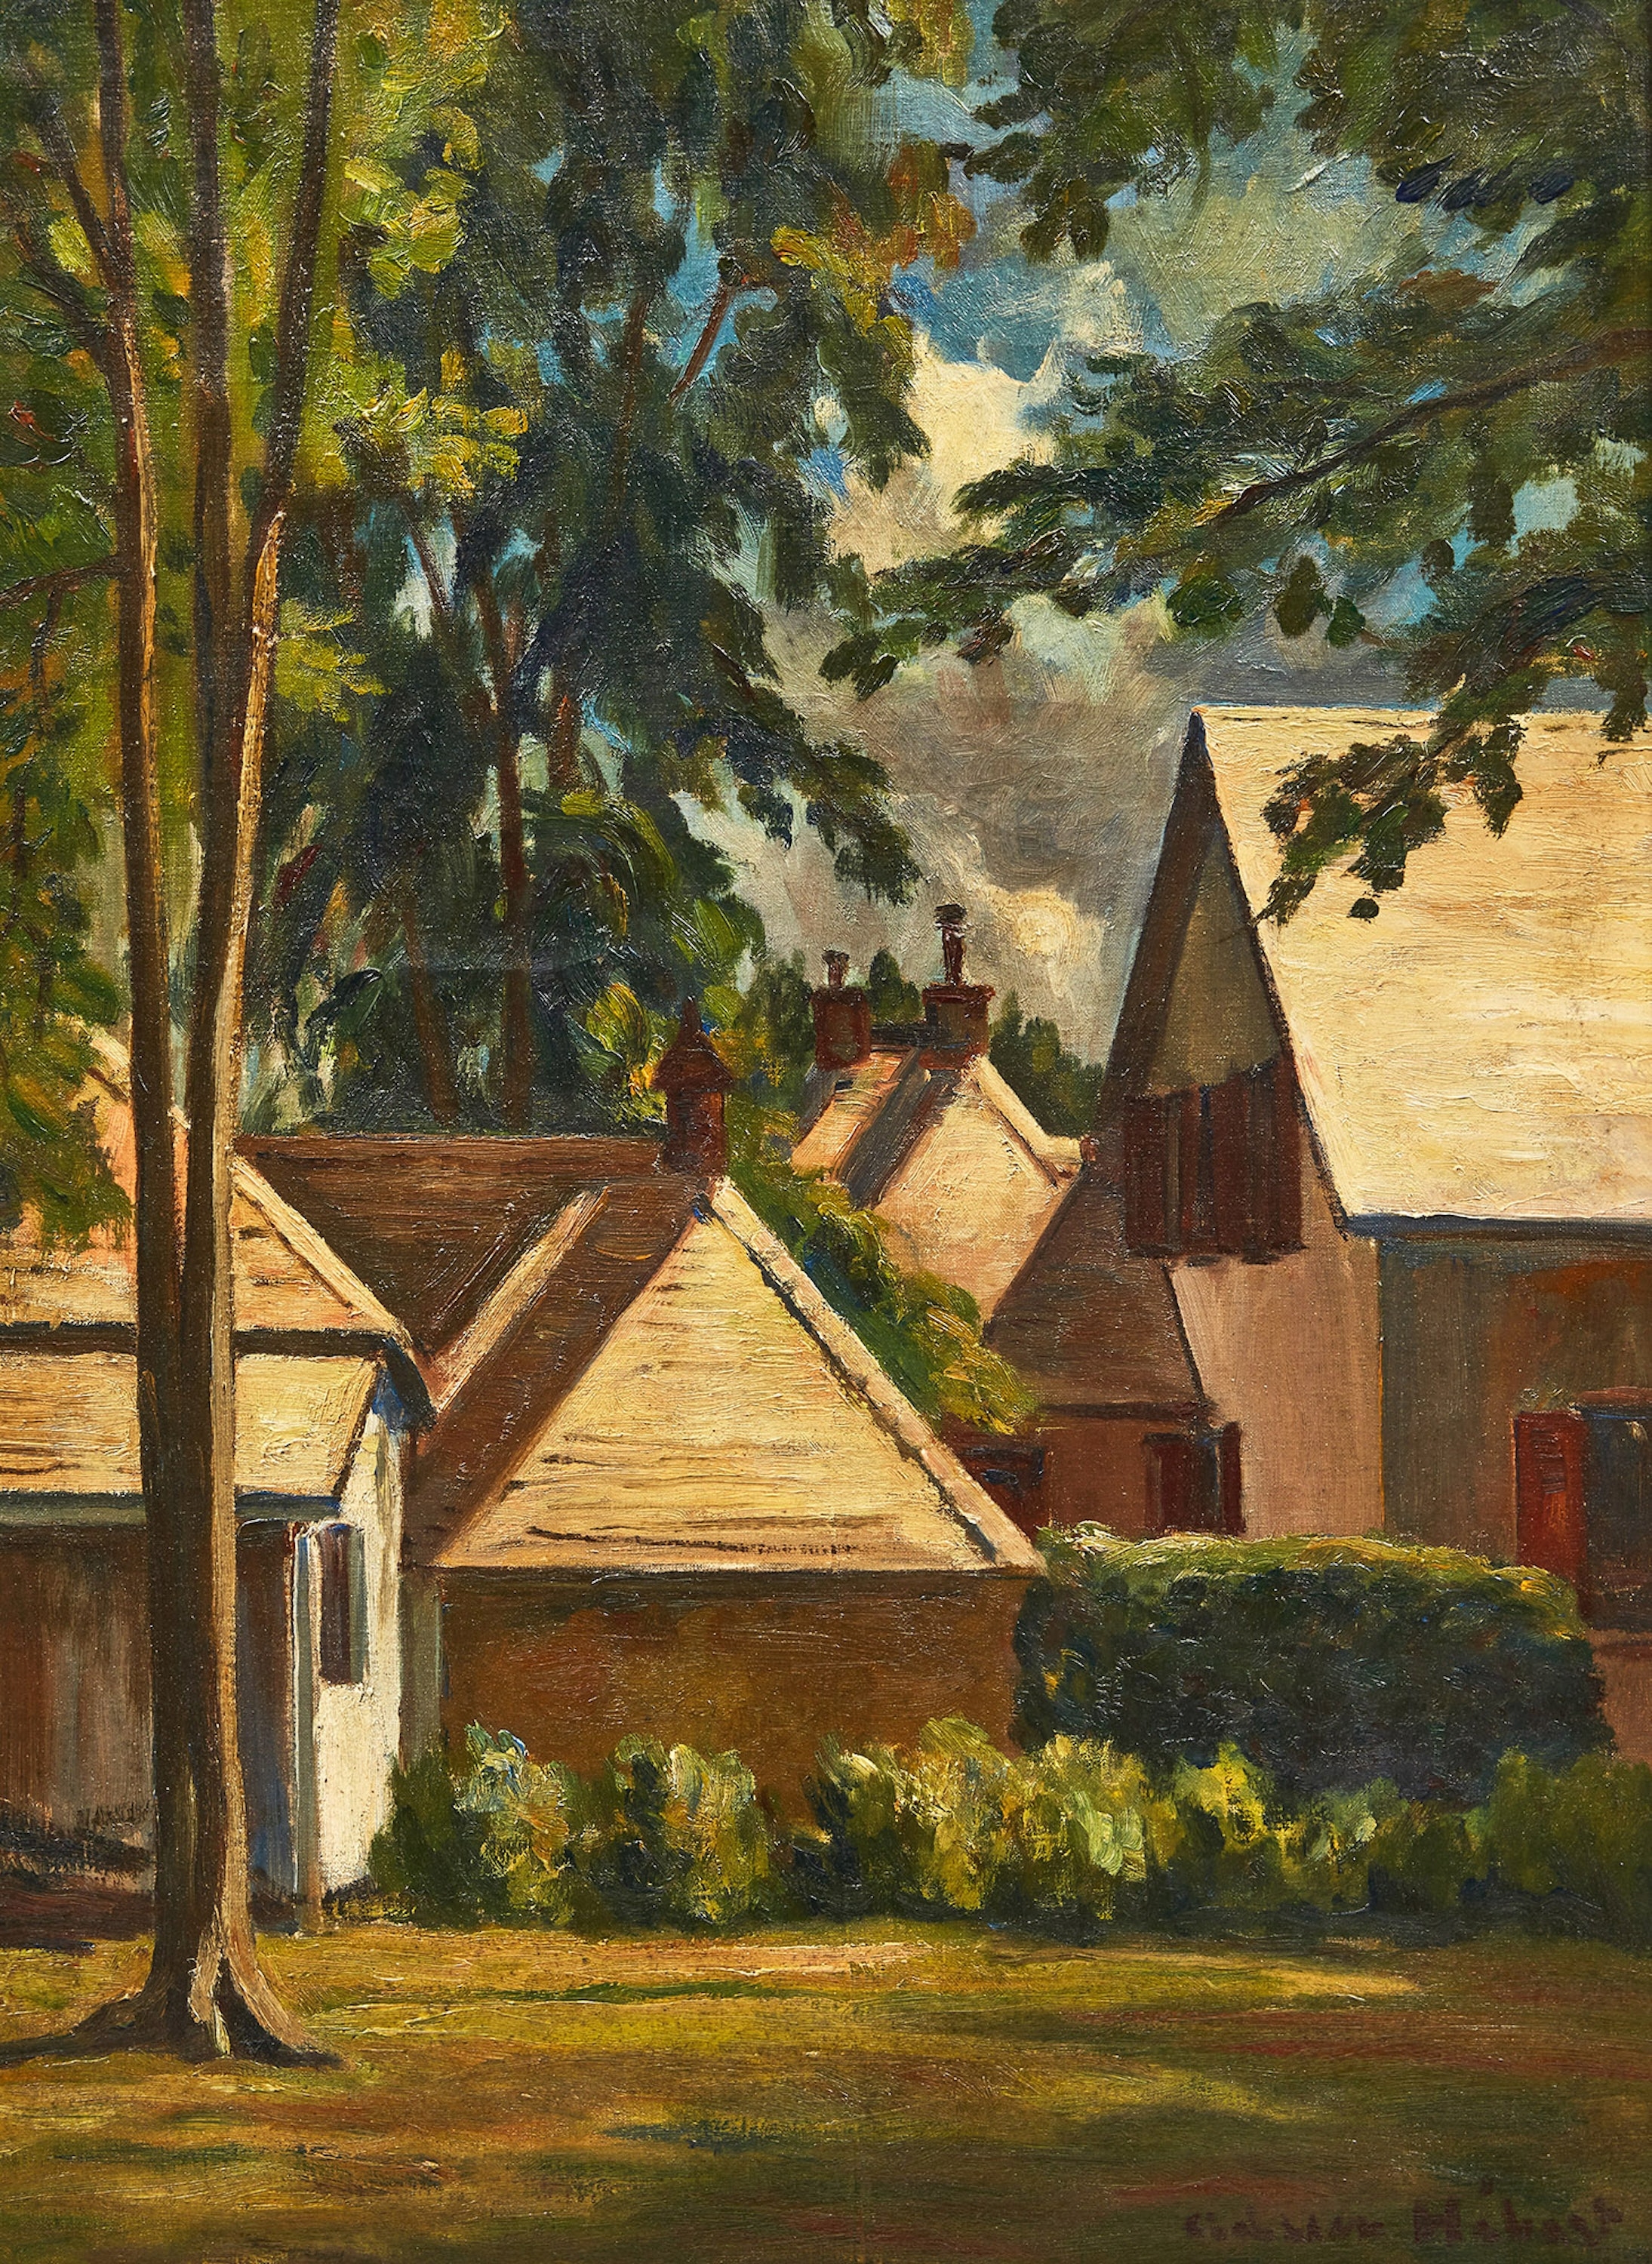 Artwork by Adrien Hébert, Houses in a Landscape, Made of oil on canvas